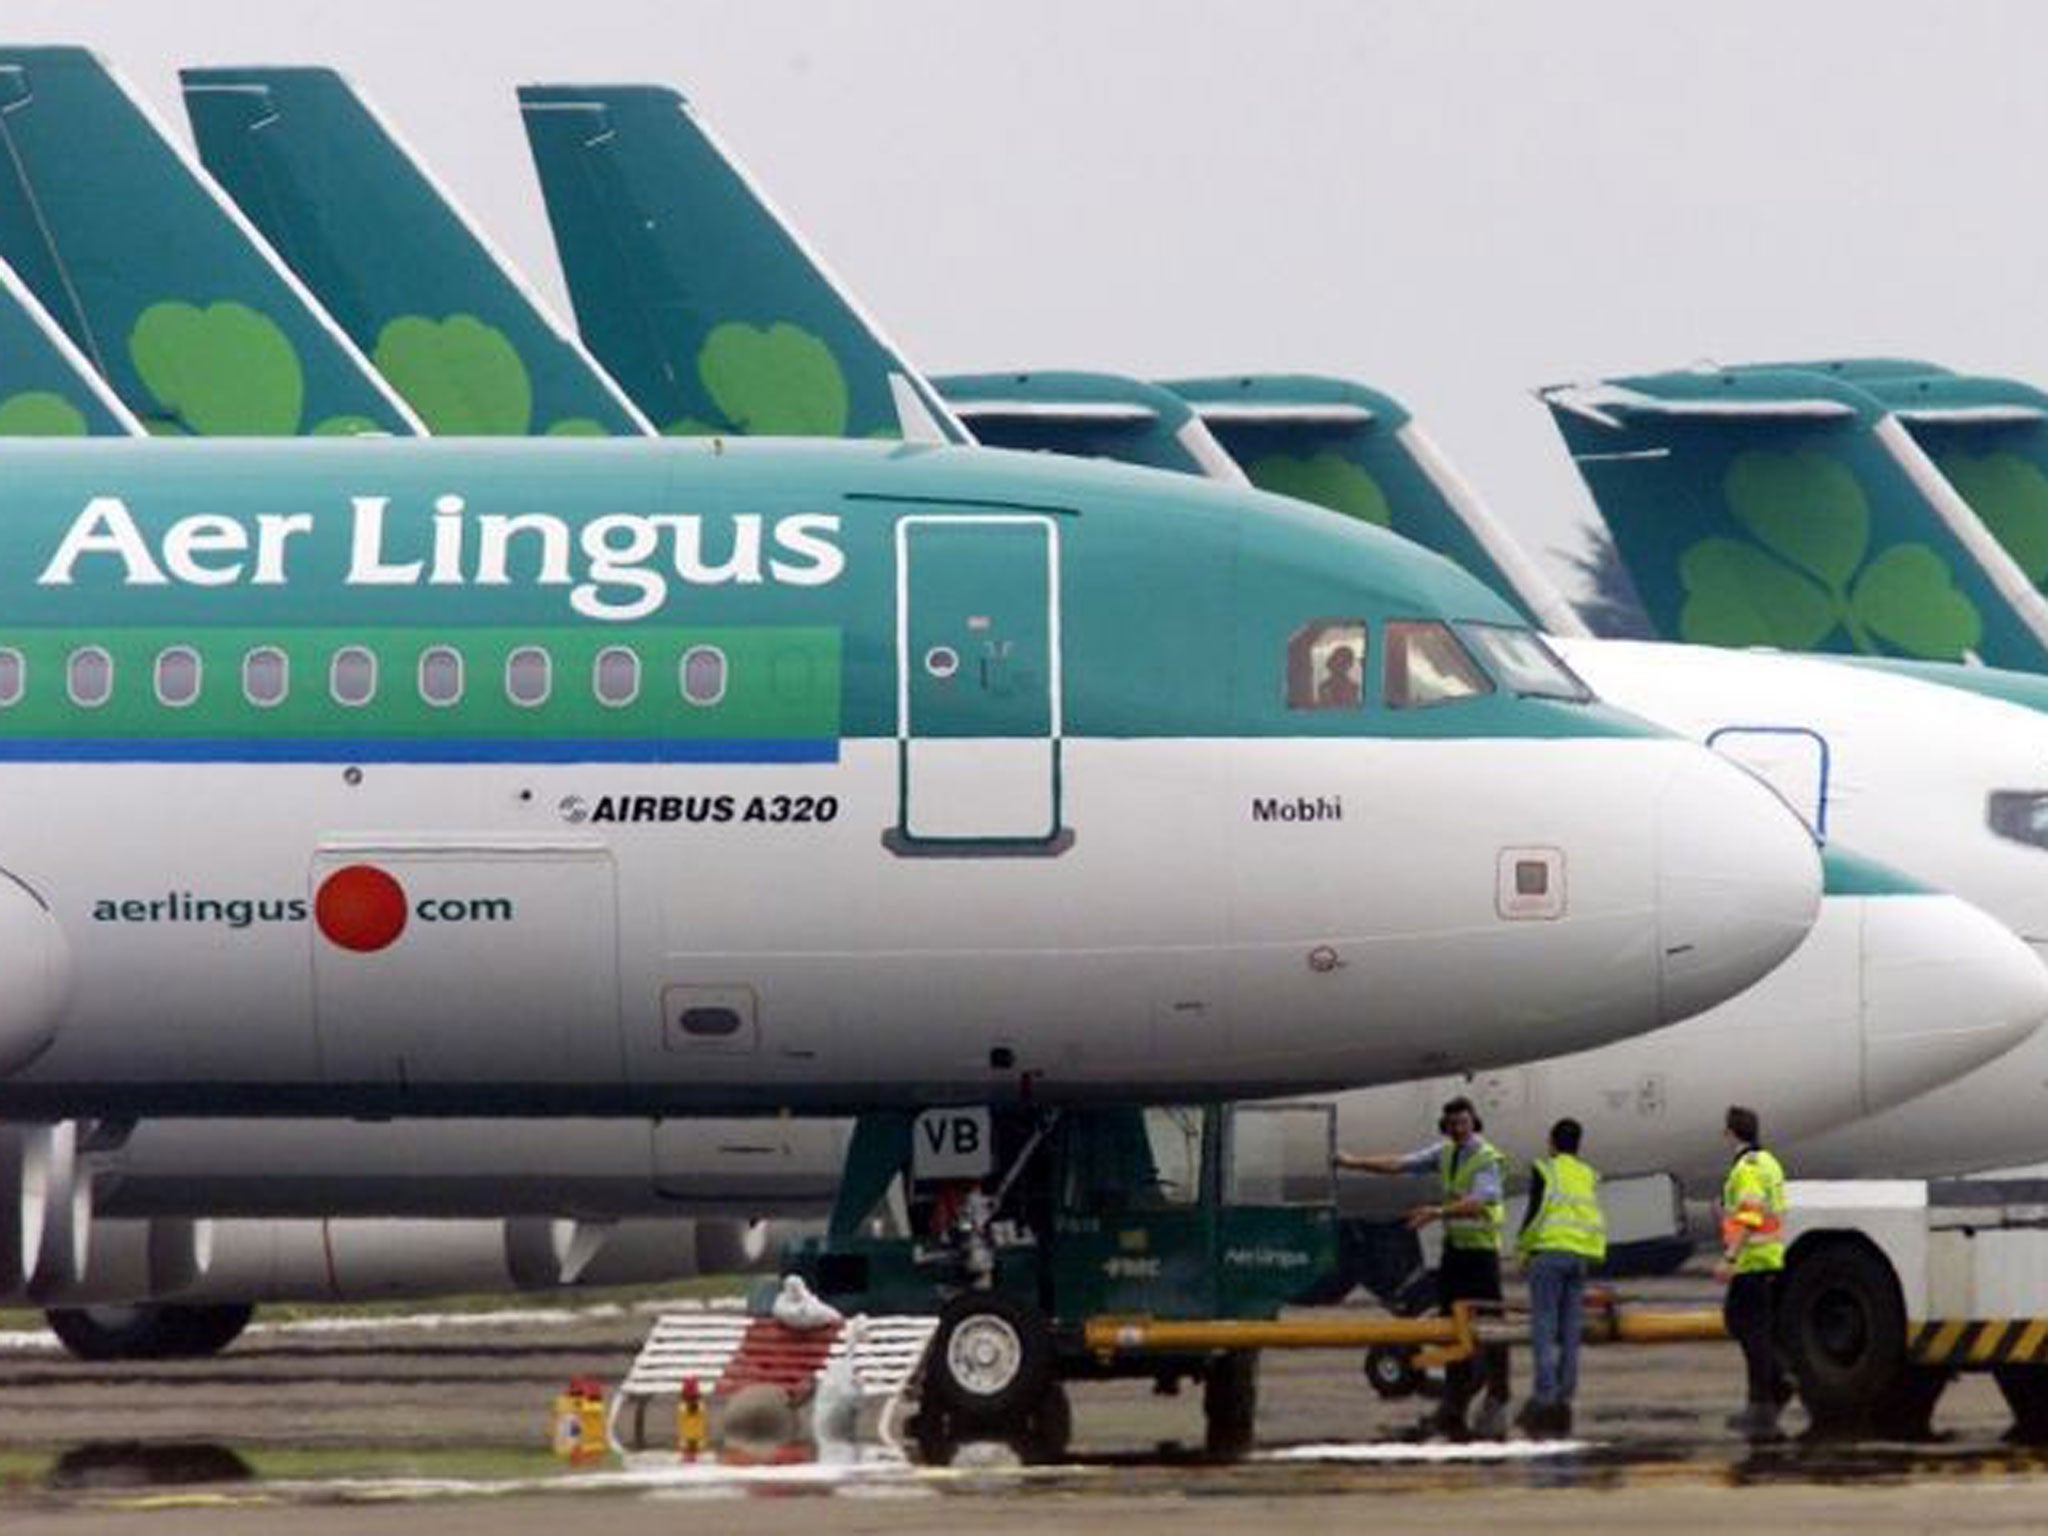 Aer Lingus is seeking indemnity for the incident